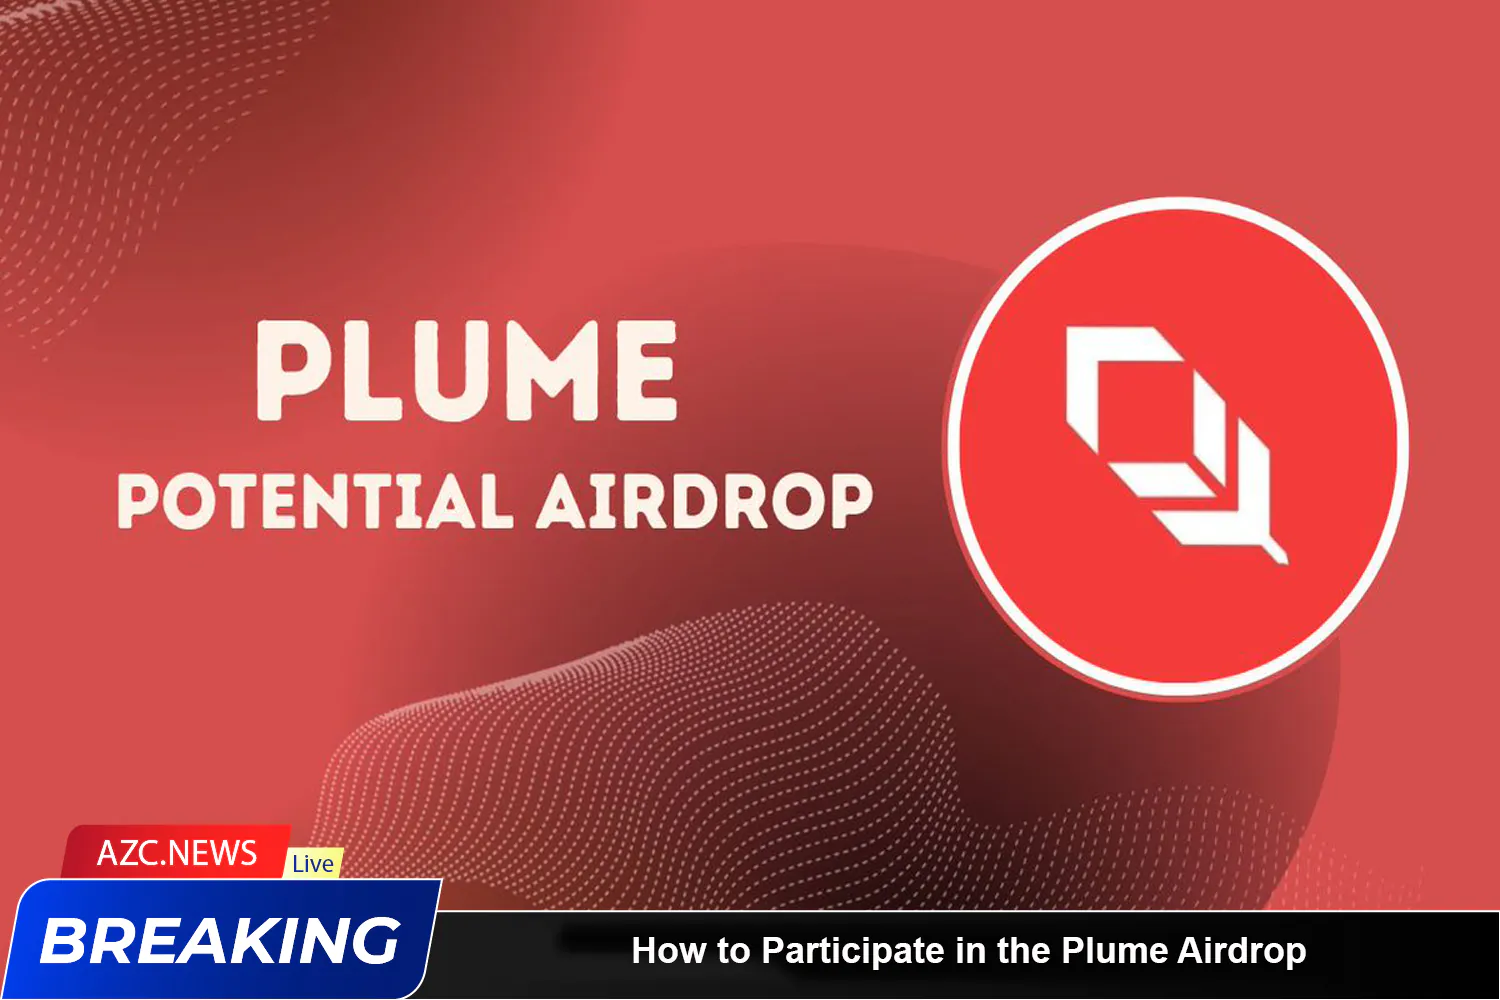 How To Participate In The Plume Airdrop